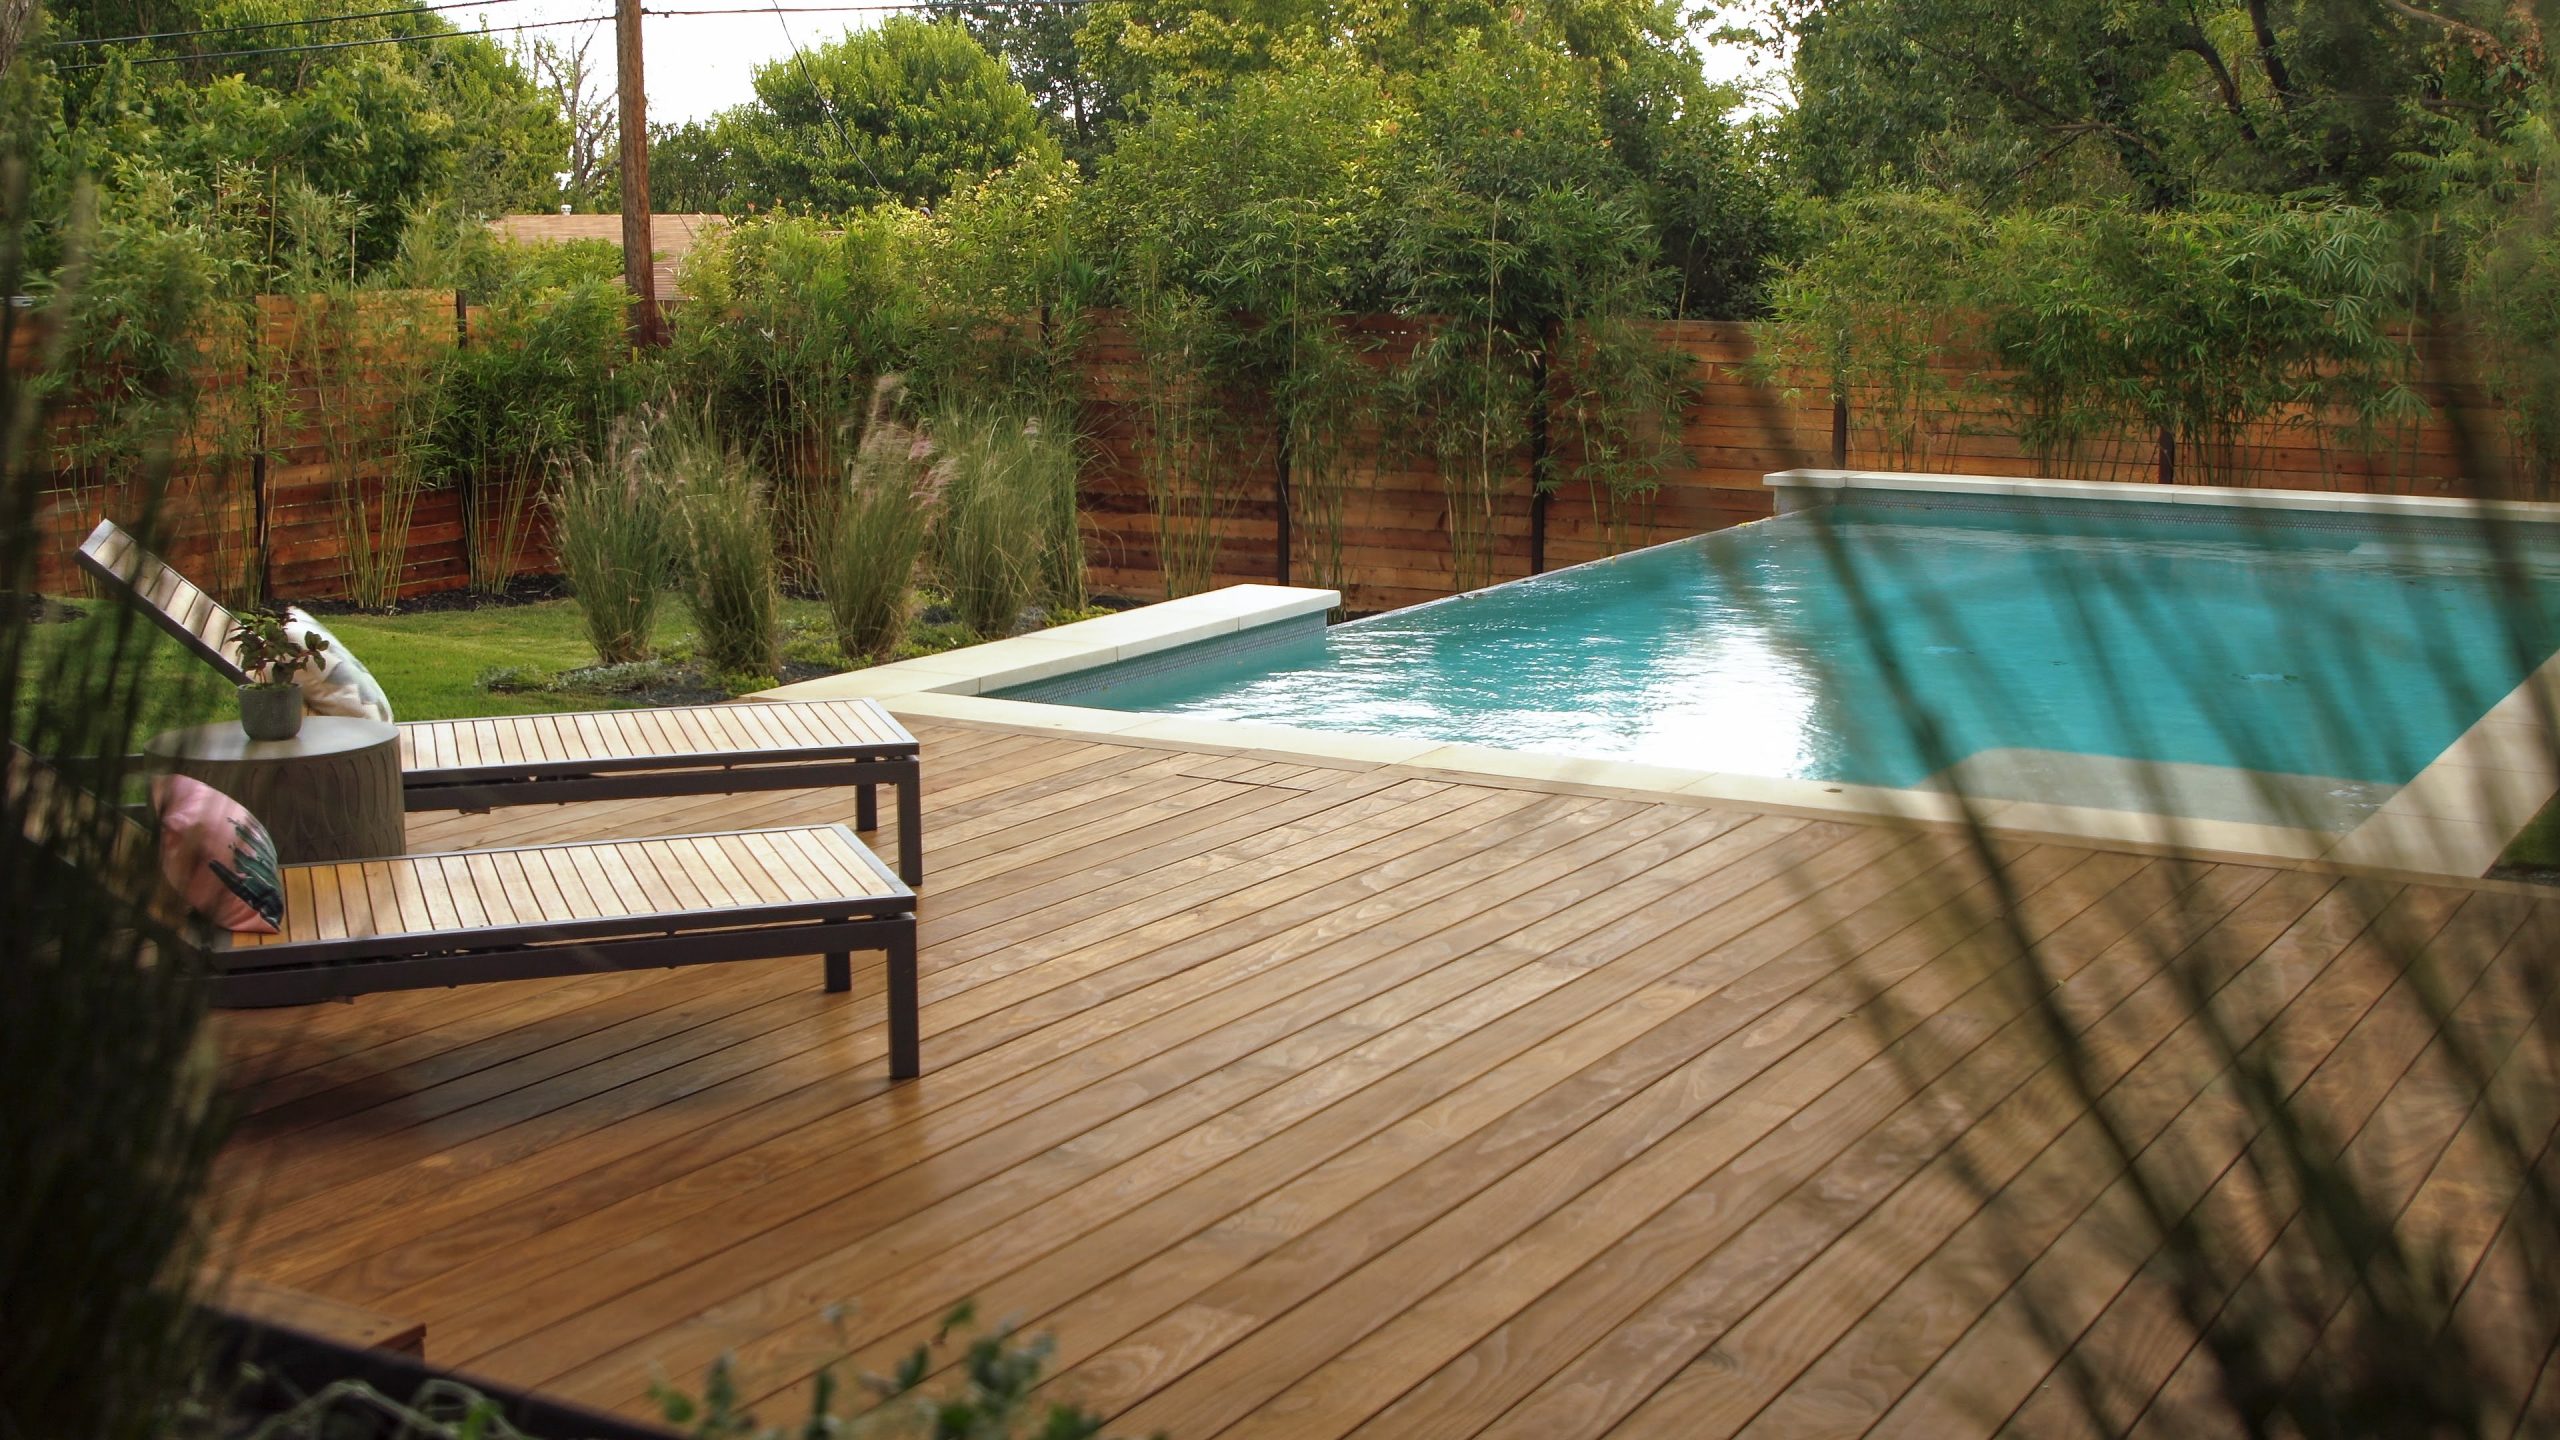 Pool area with wood deck and seatings.